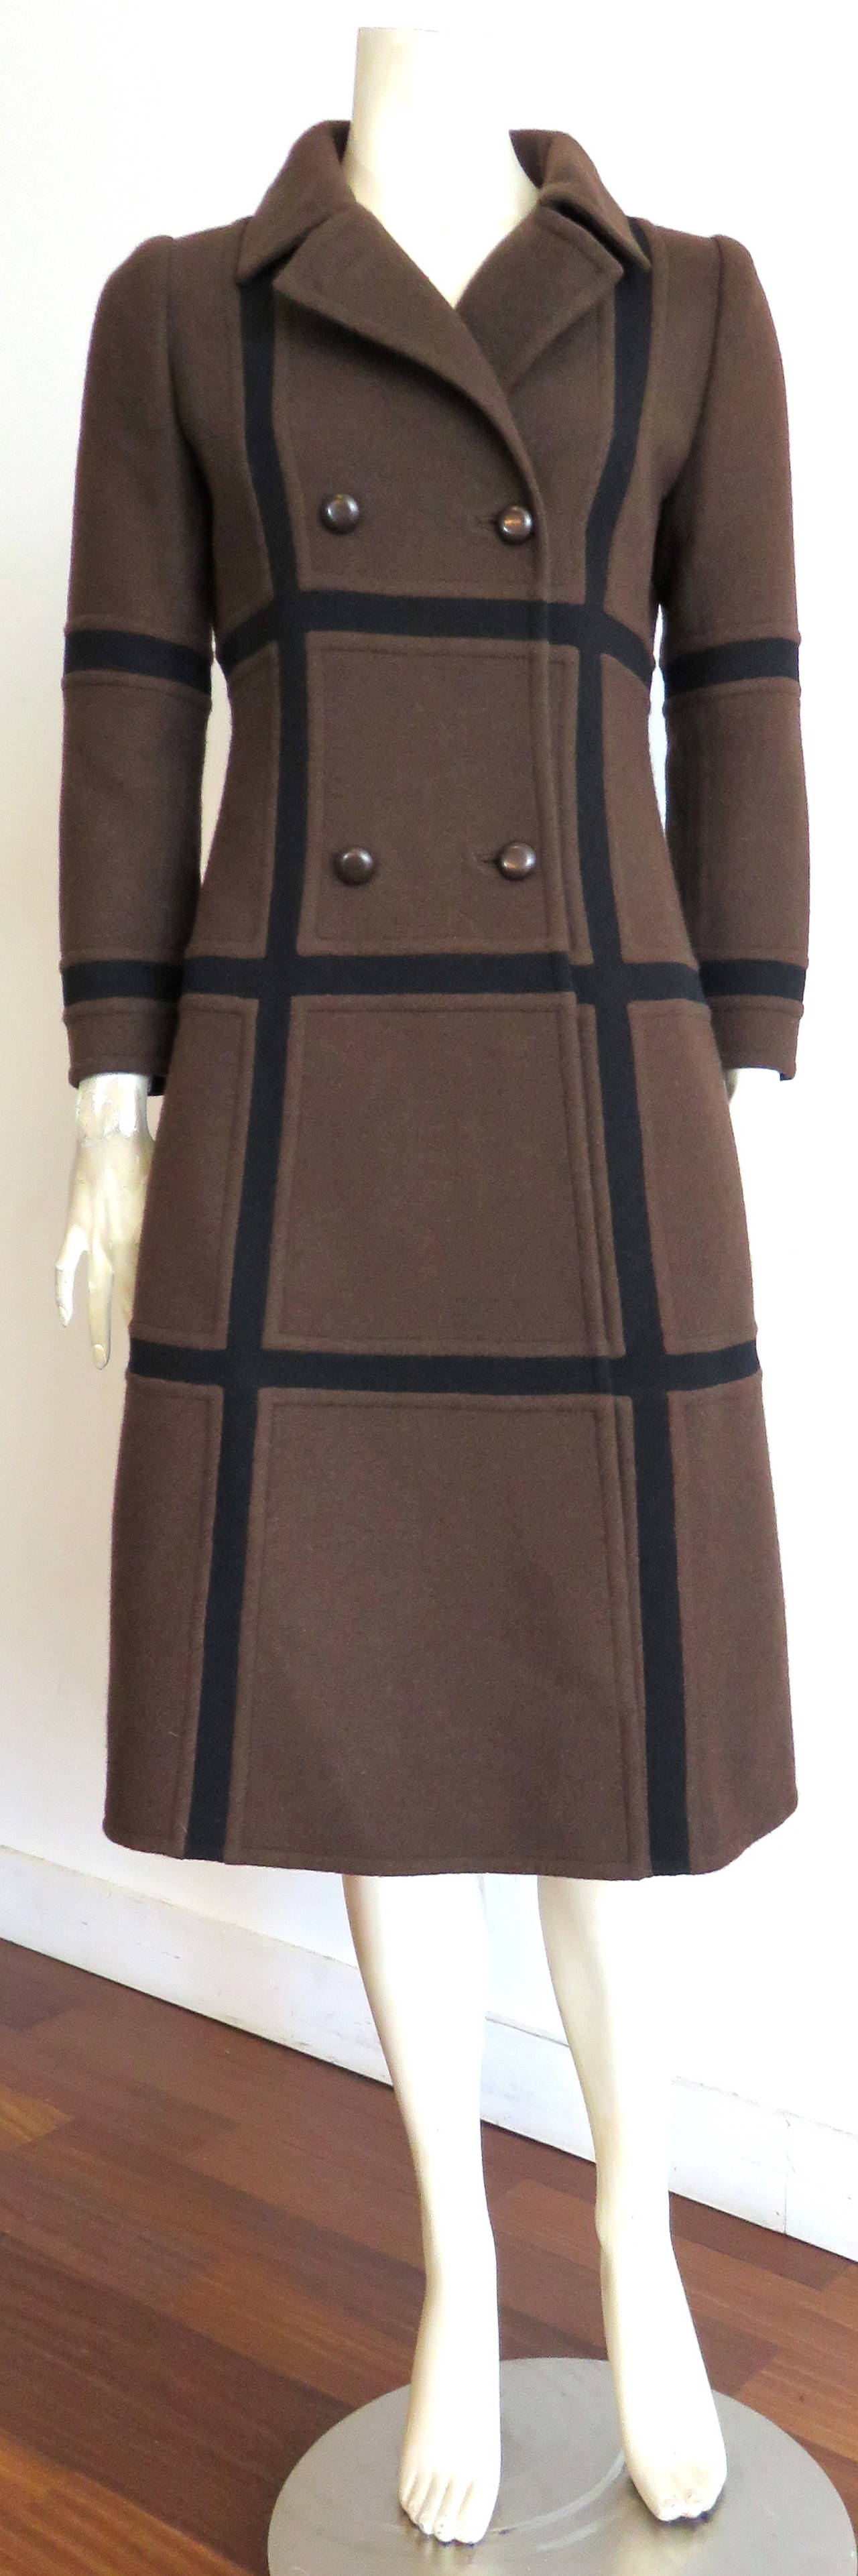 Excellent condition, 1970's, GIVENCHY, haute-couture, wool paneled coat.

This incredible, haute-couture coat features square-shaped, seam-cut, paneling in chocolate brown, and black wool.

Double-front button opening.  The coat has a fitted